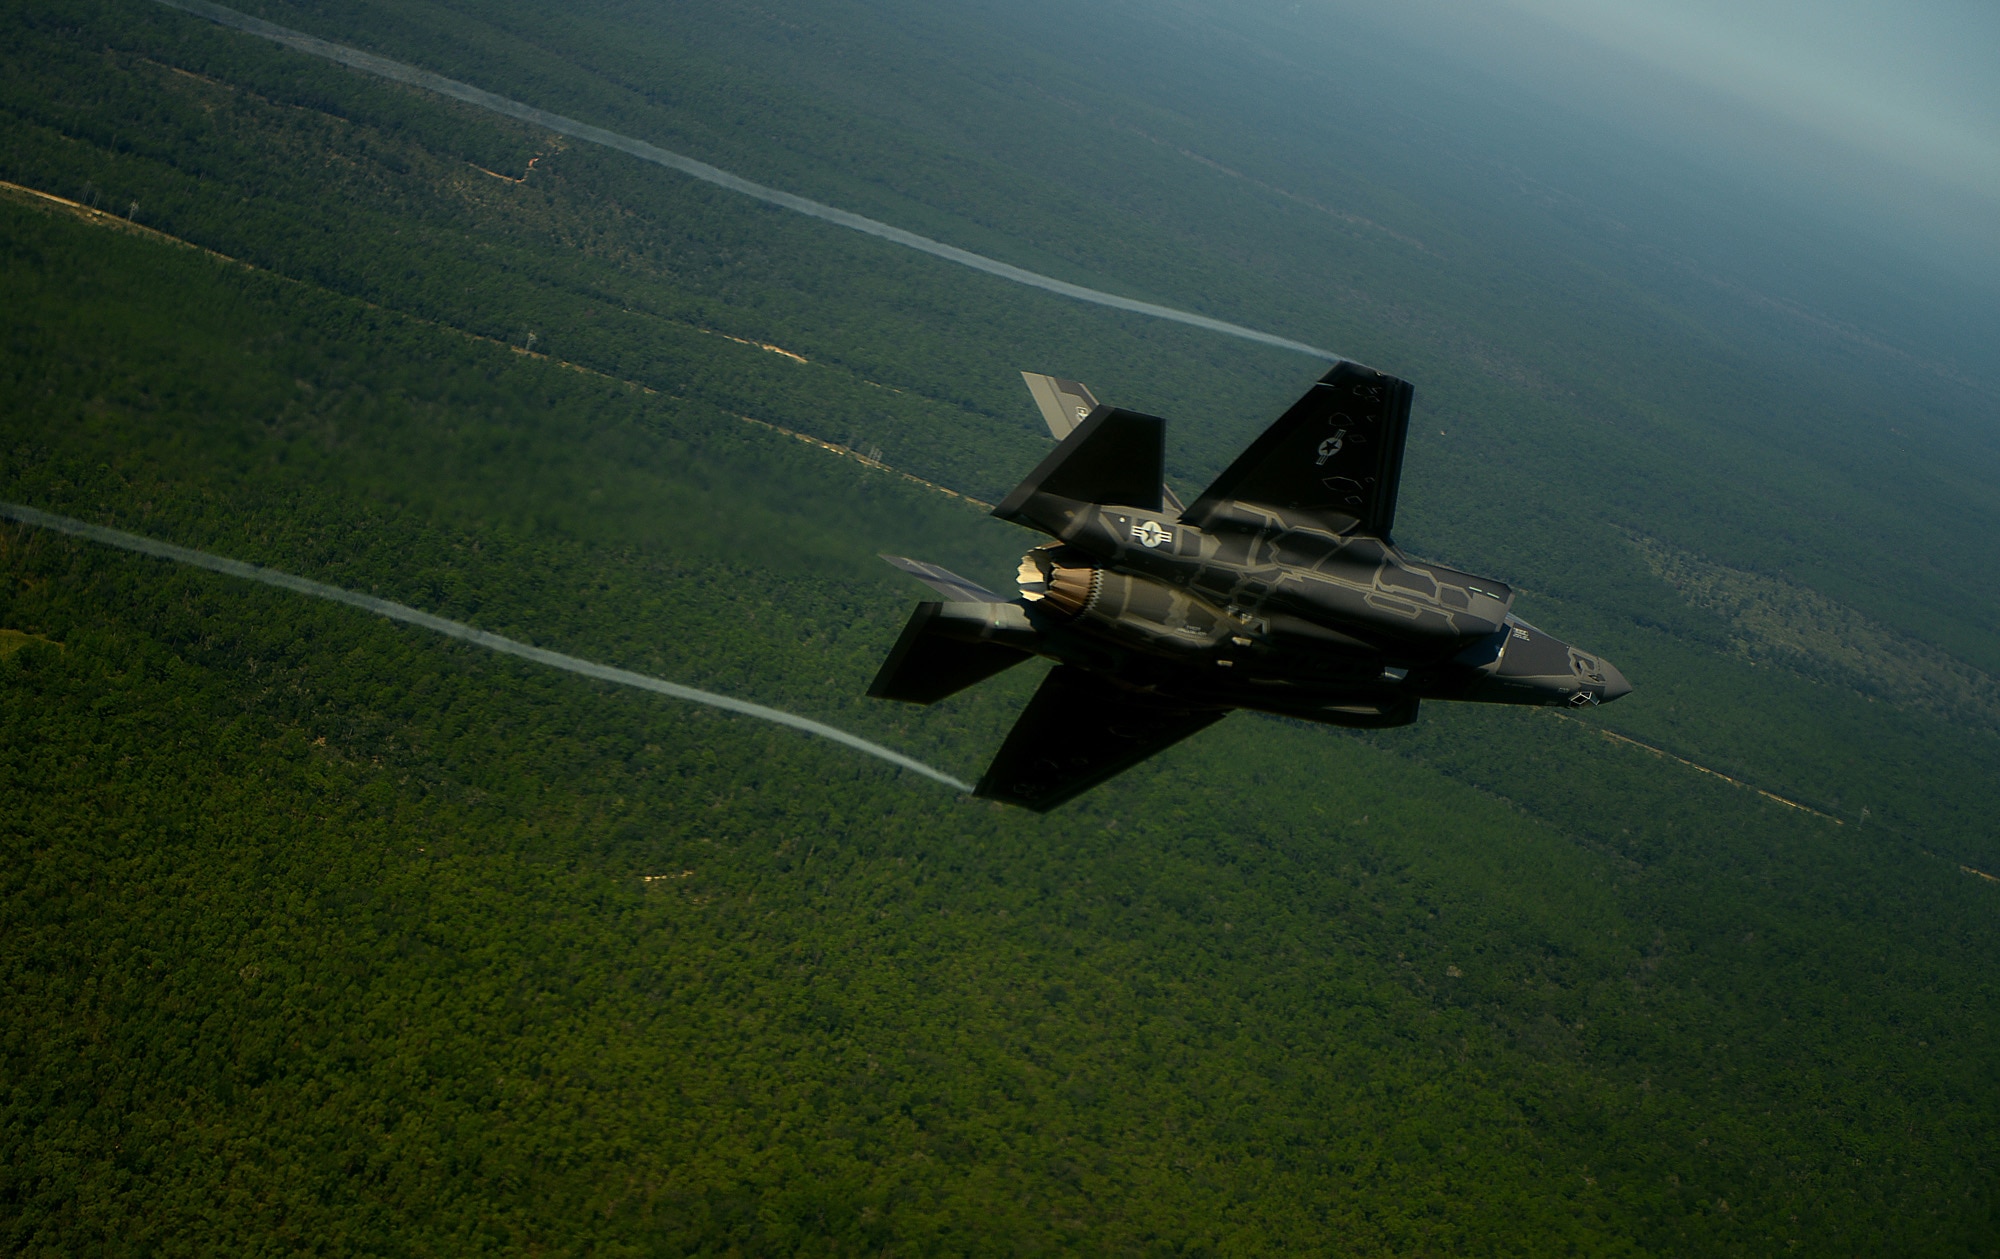 An F-35A Lightning II joint strike fighter from the 33rd Fighter Wing at Eglin Air Force Base, Fla., flies over the Emerald Coast Sept. 19, 2012.  (U.S. Air Force photo/Master Sgt. Jeremy T. Lock)